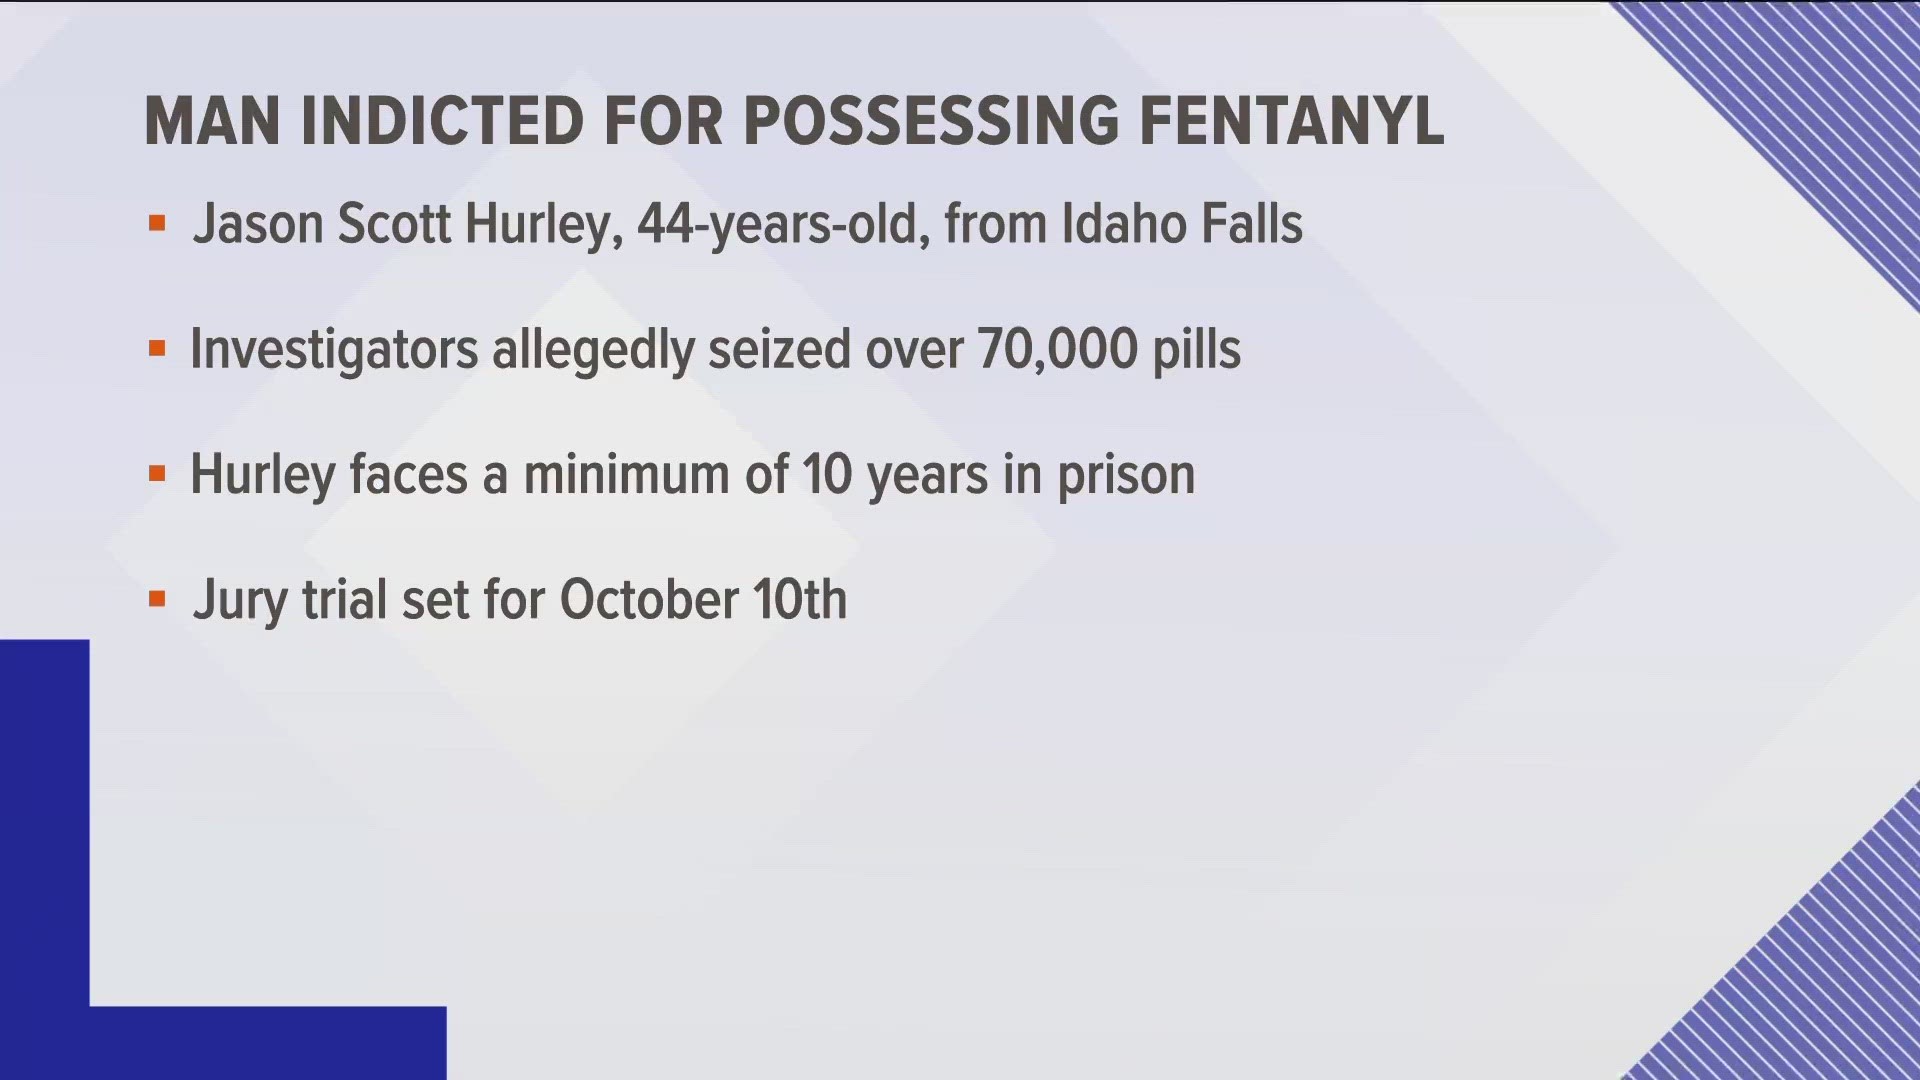 Police said they seized over 70,000 pills that contained fentanyl.